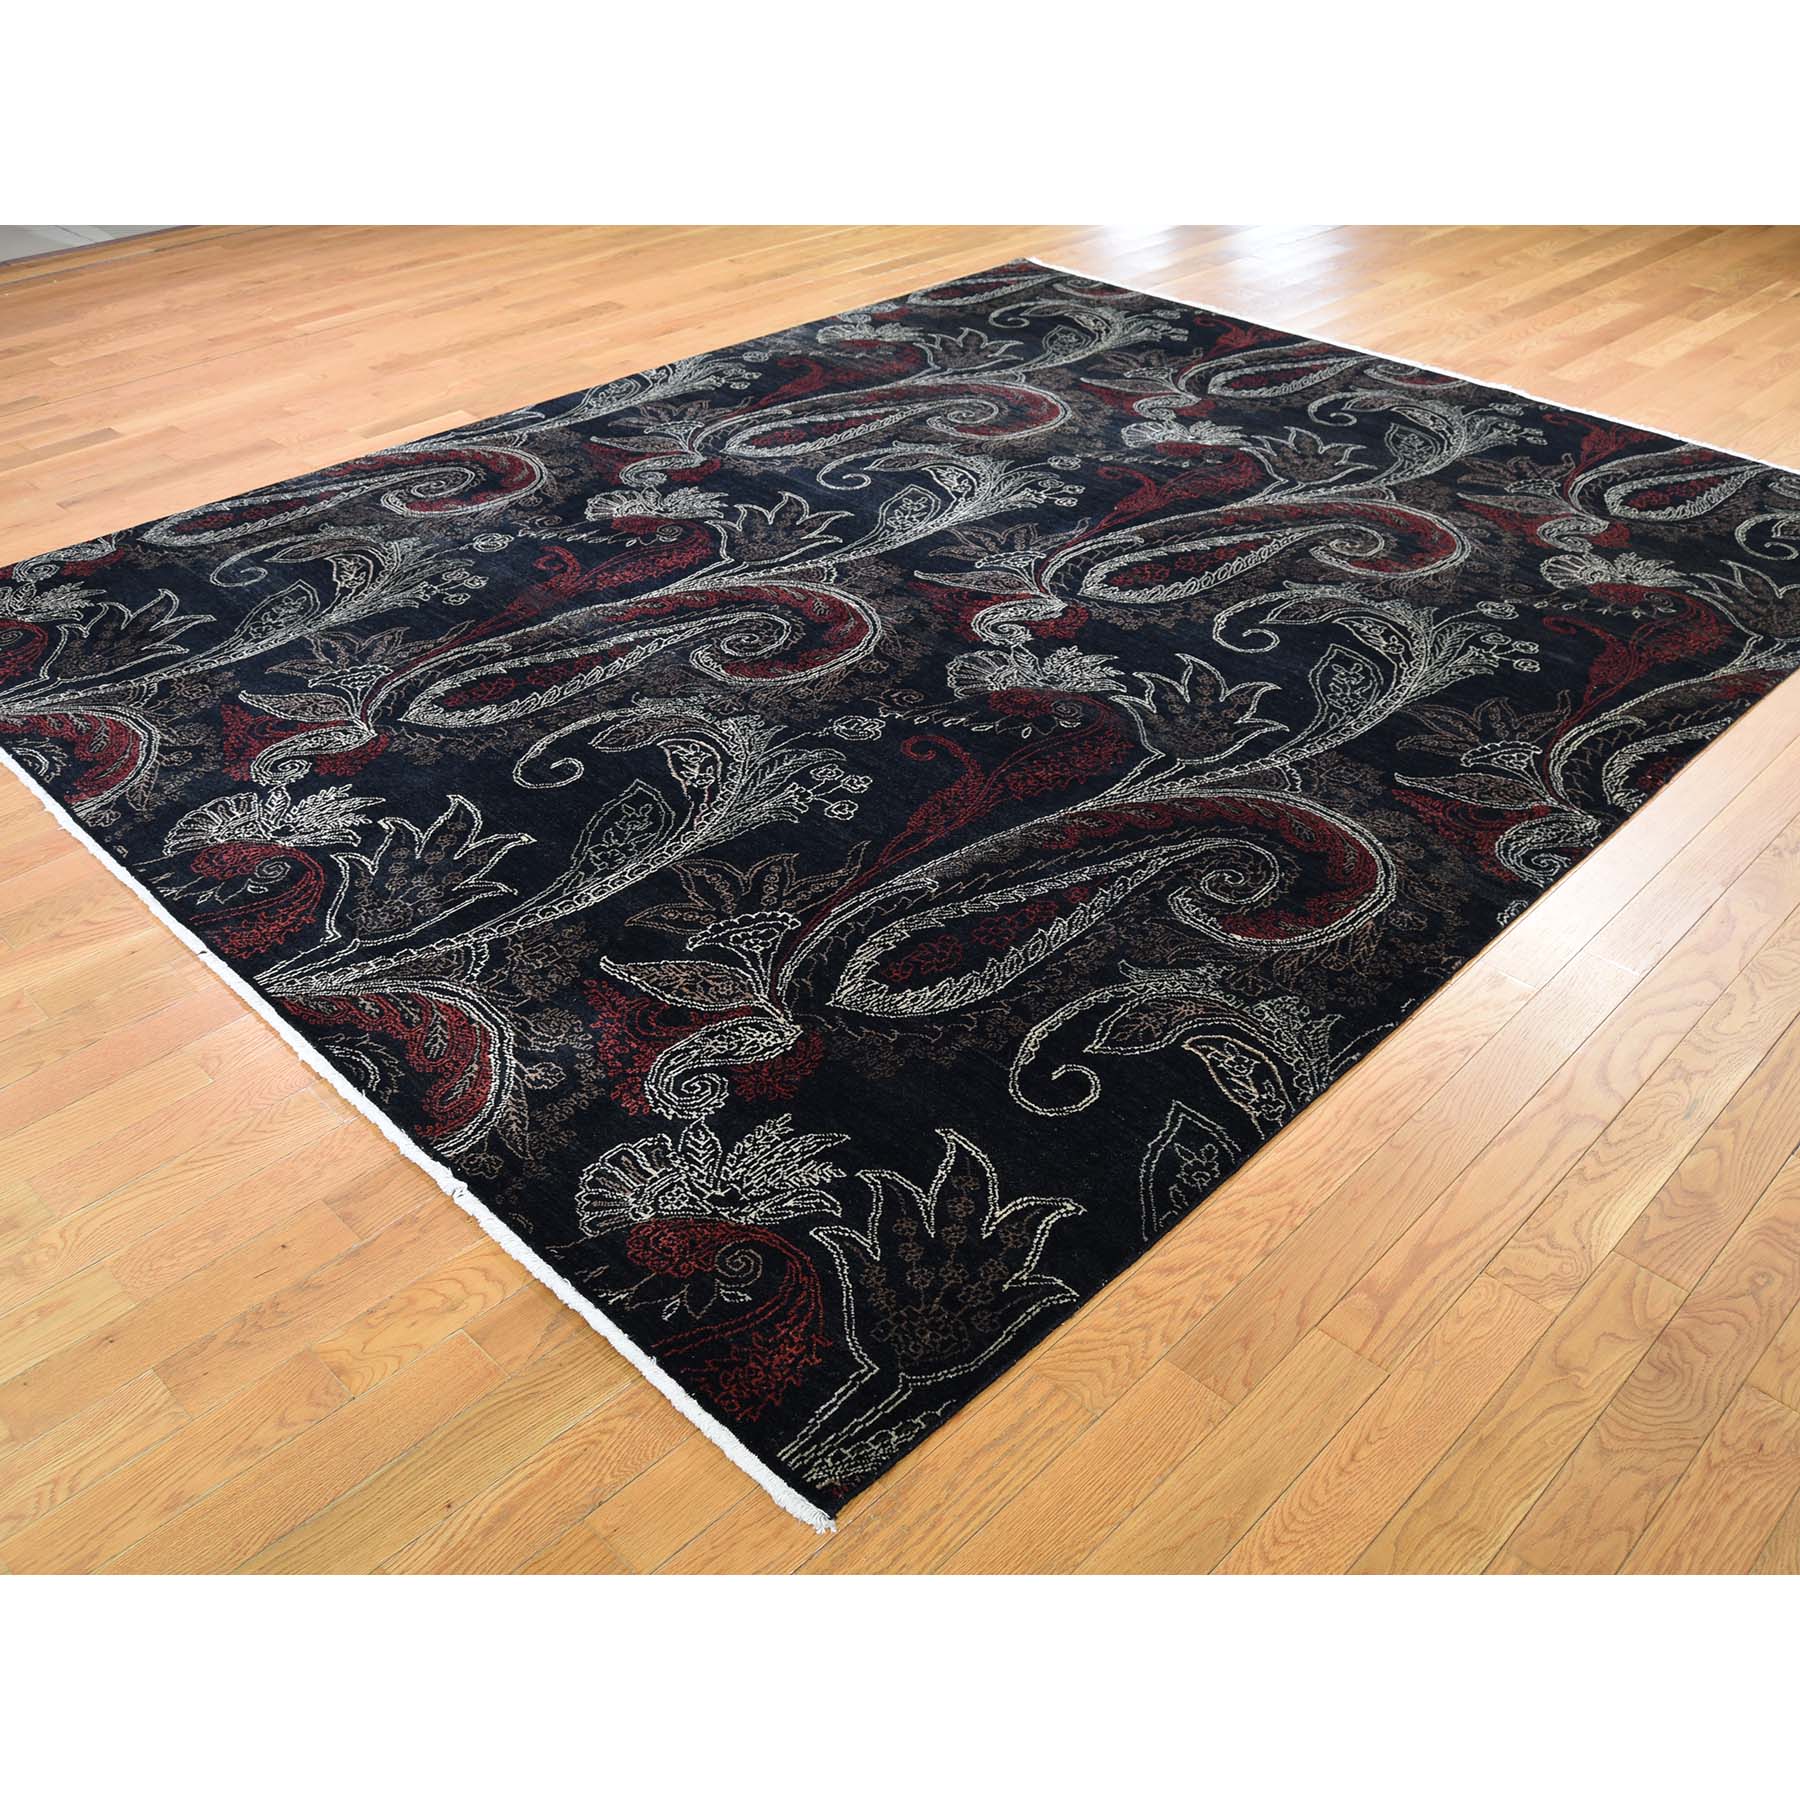 8-1 x10- Black Modern Tulip and Paisley Design Hand Knotted Oriental Rug 